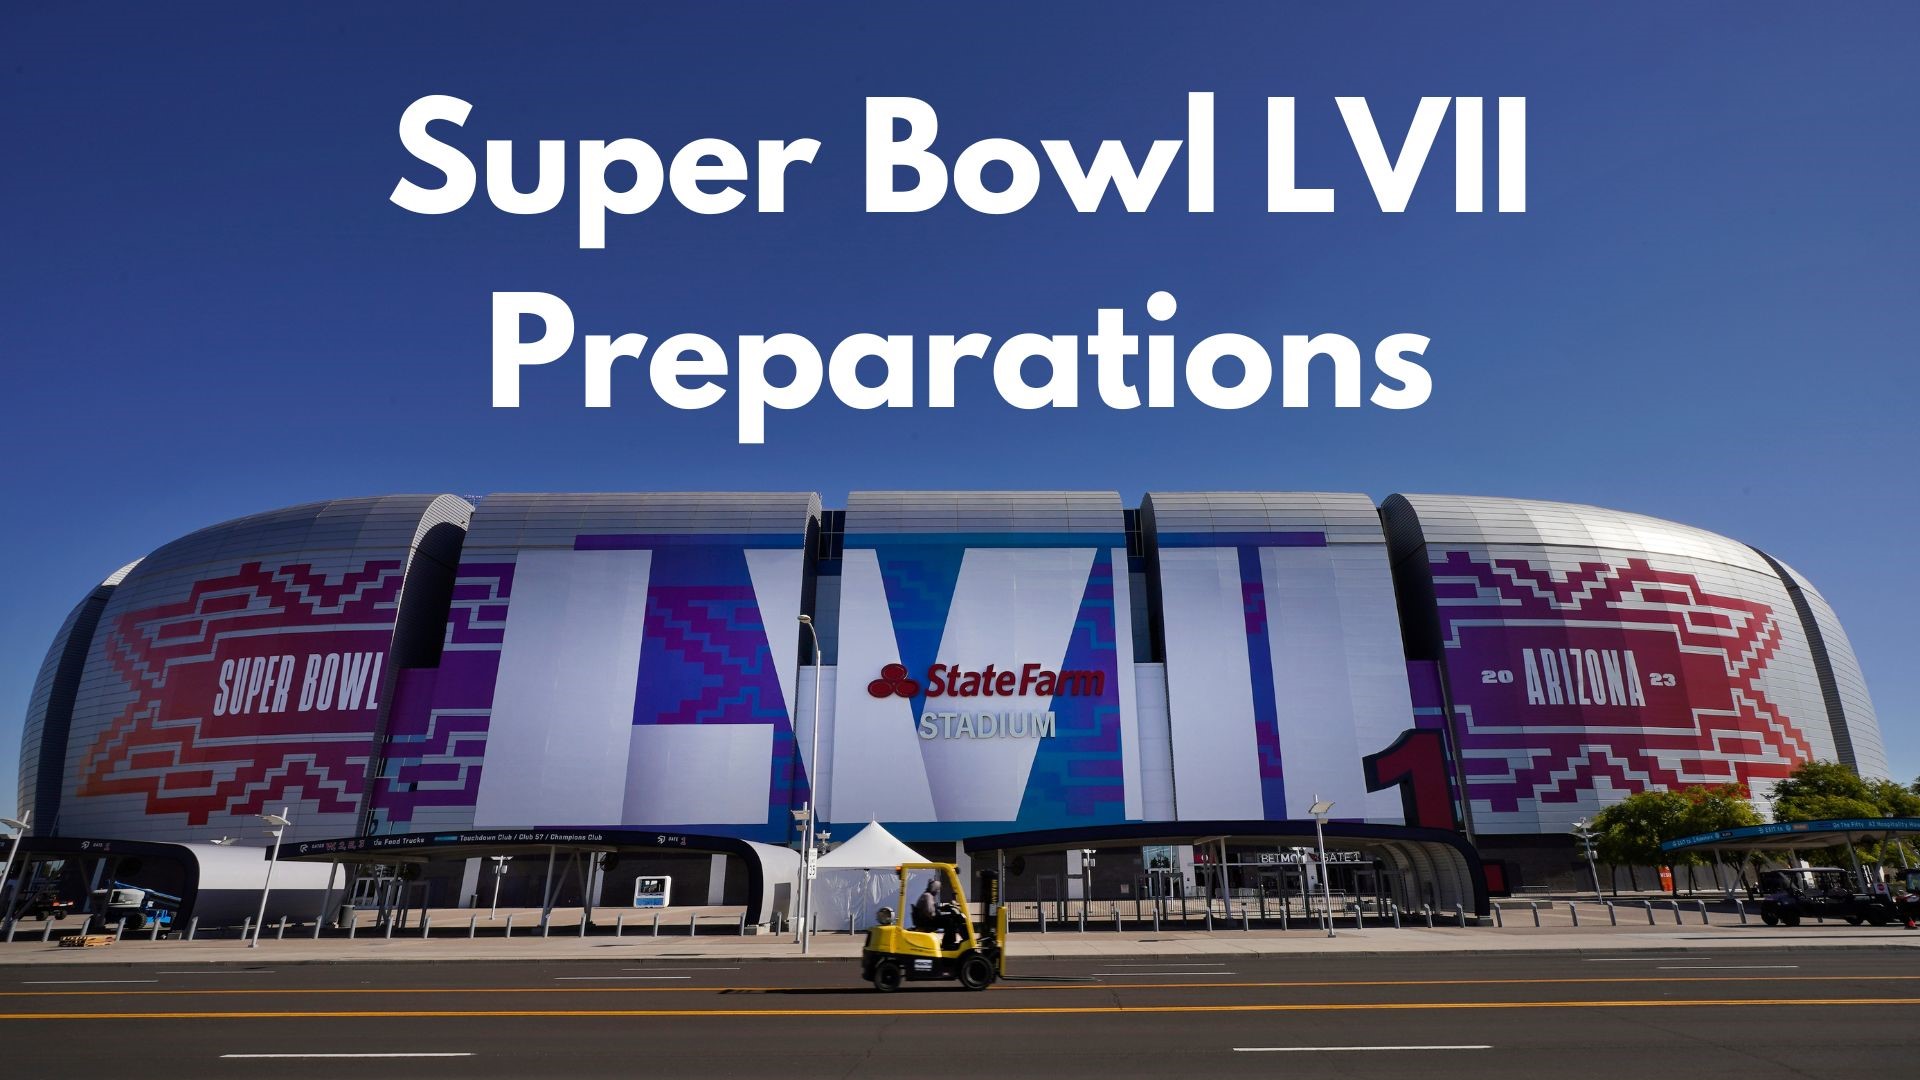 Super Bowl LVII is expected to set a betting record - OPB